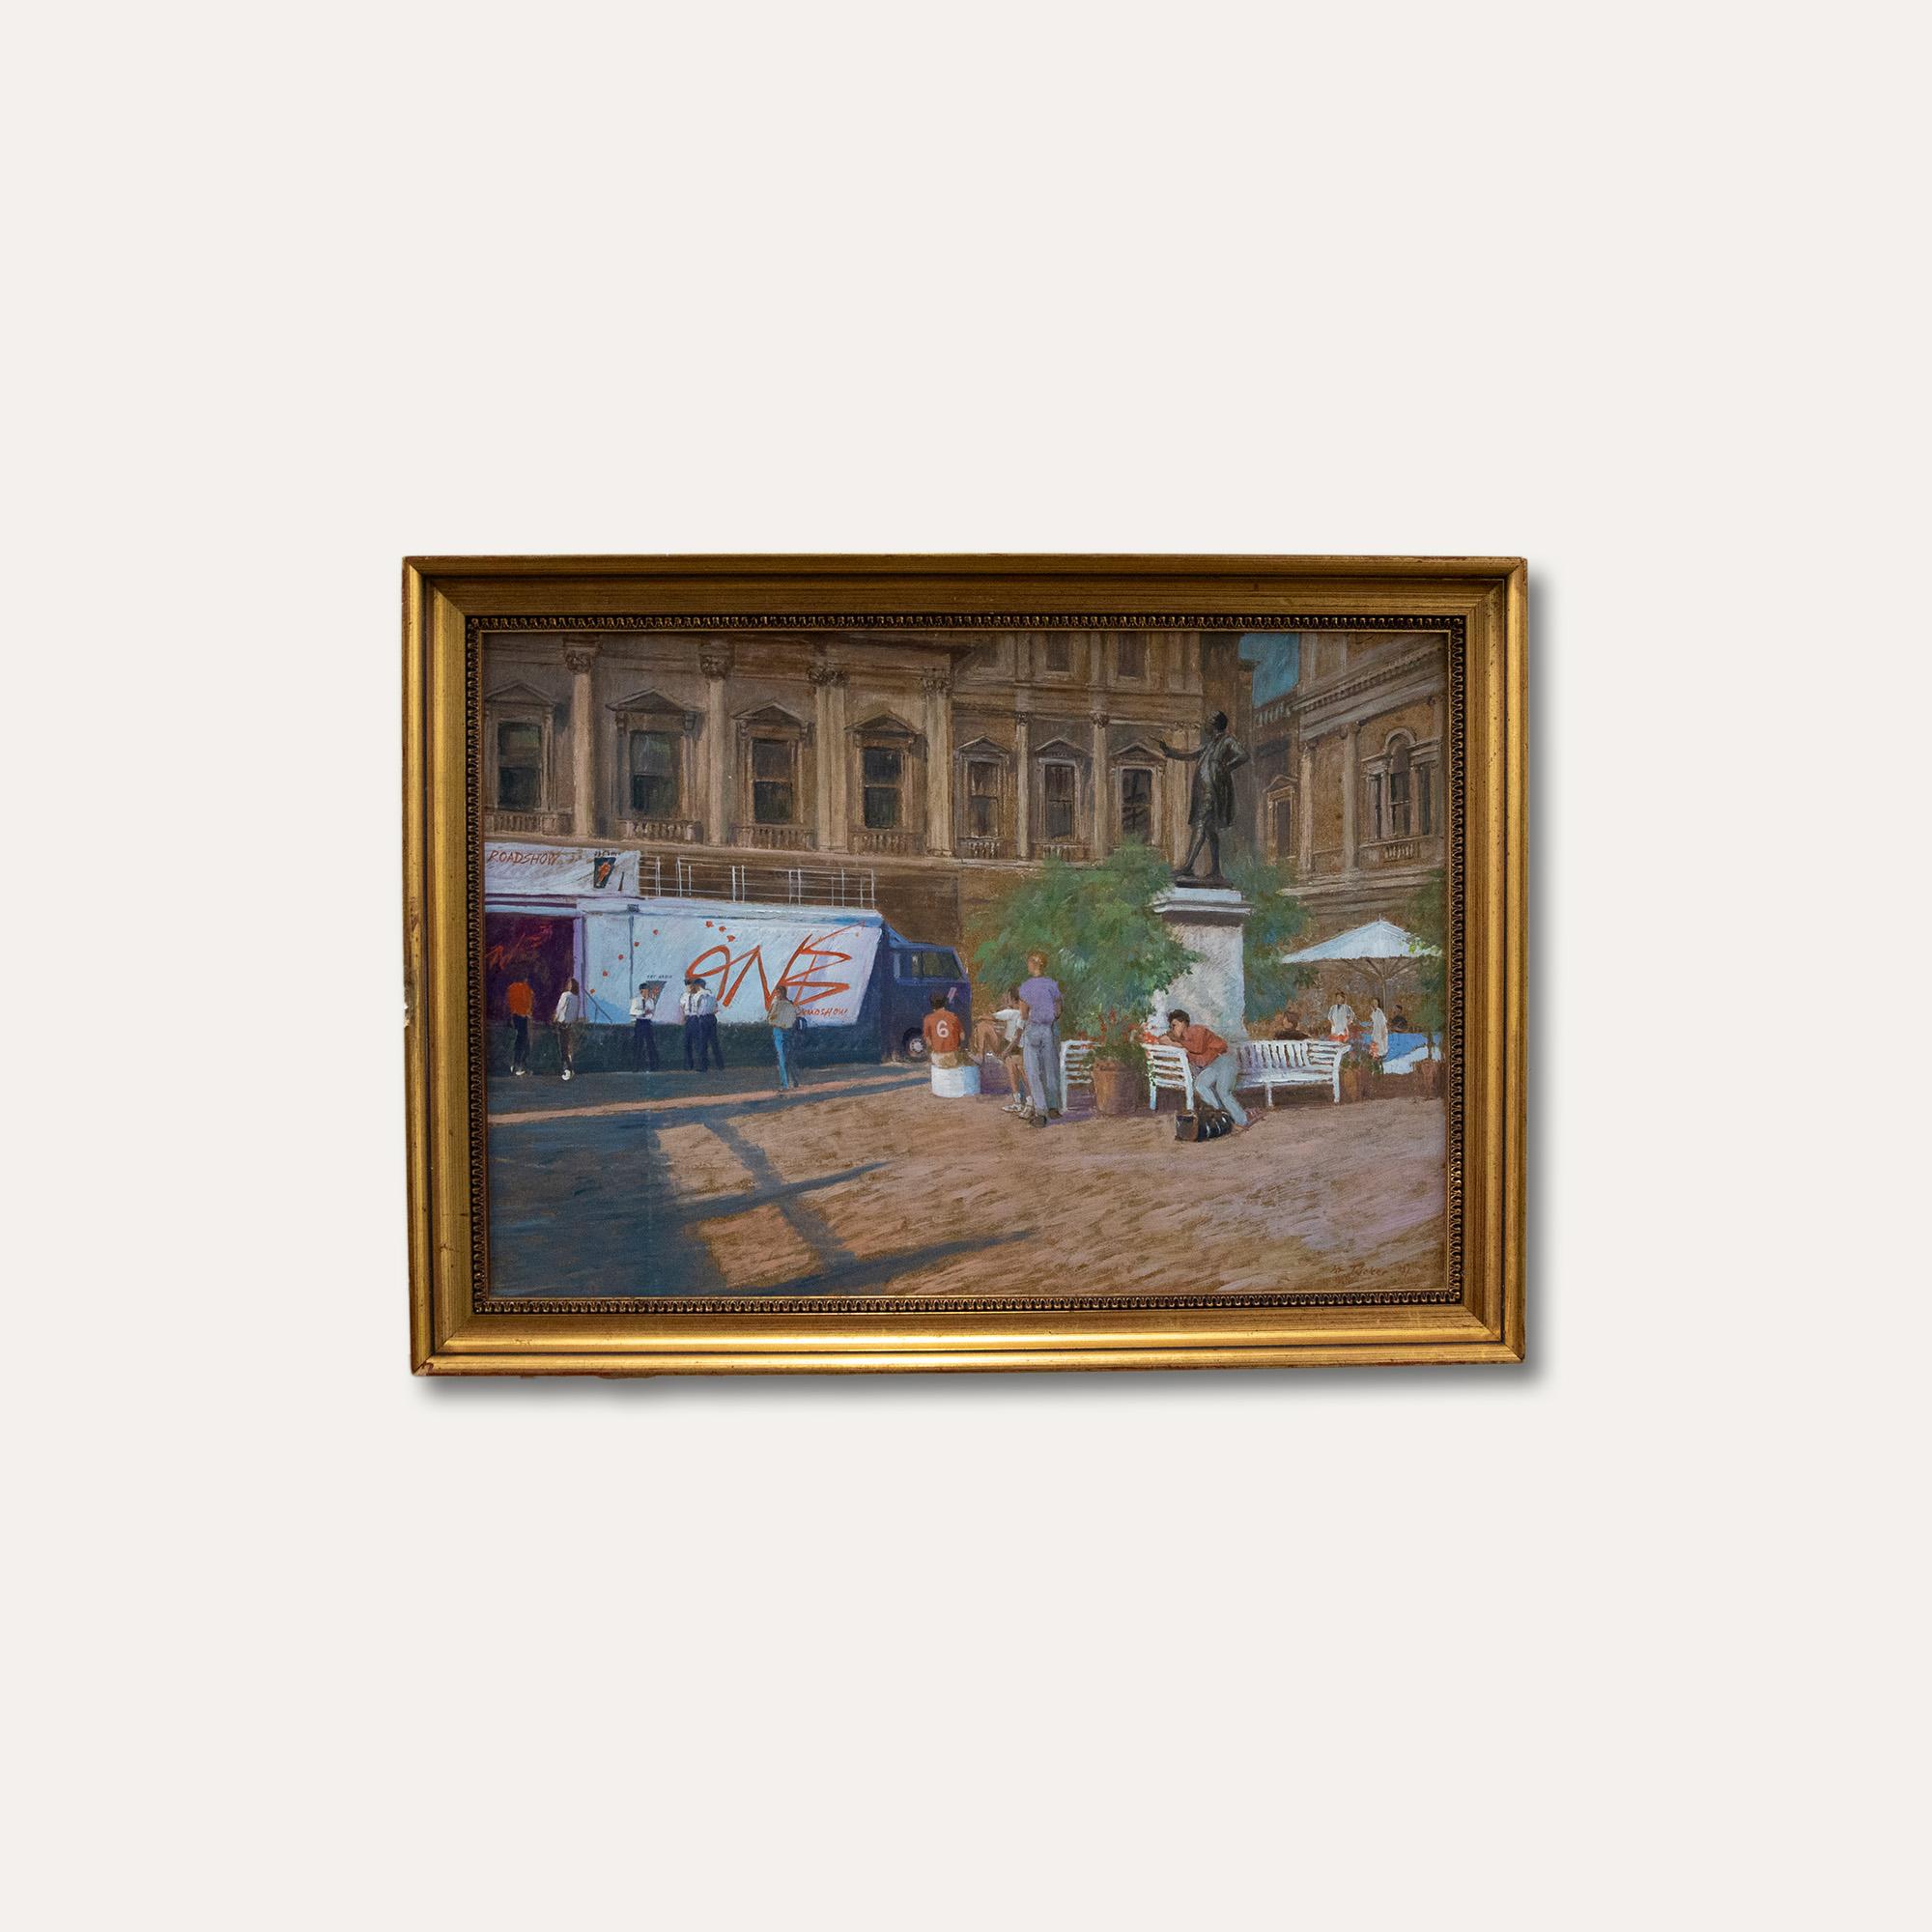 A charming street scene depicting figures preparing for a concert outside of the Royal Academy building in London in 1991. Signed and dated to the lower right. Presented in a gilt frame with lambs tongue running pattern. On board.